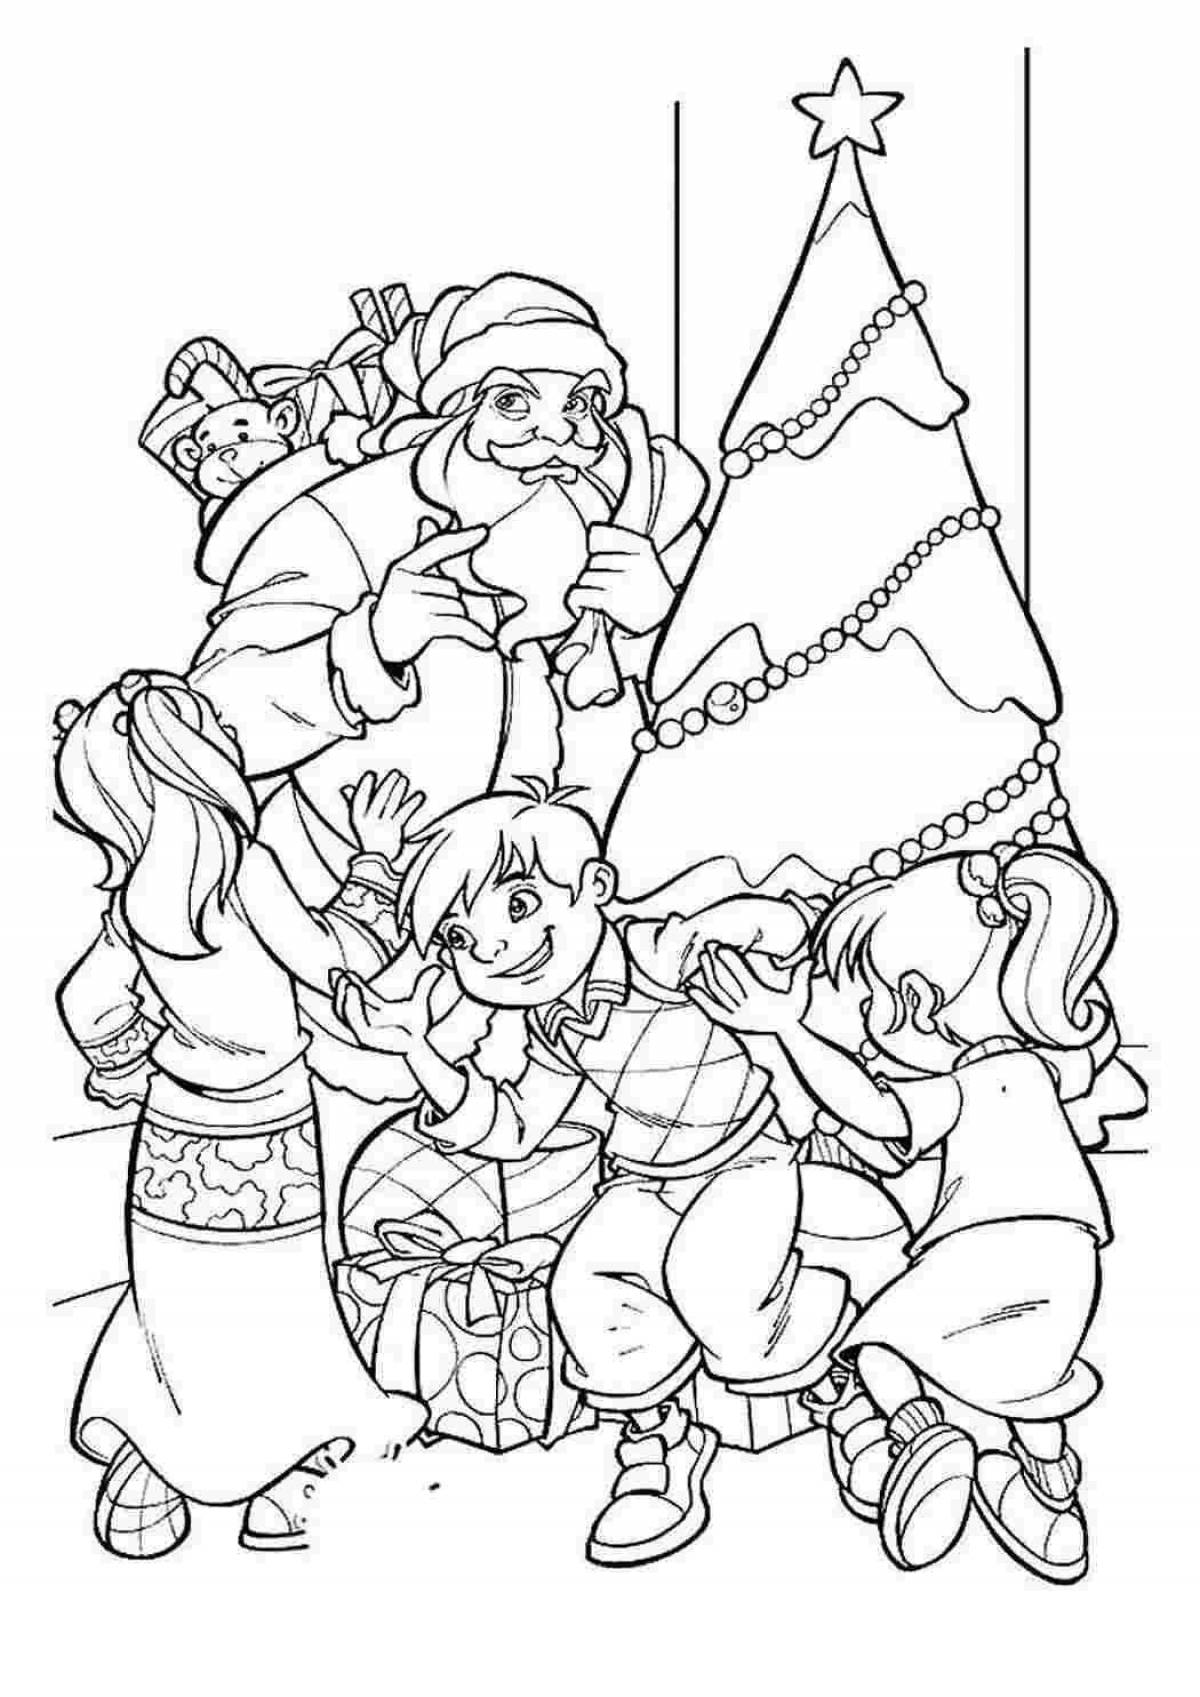 Awesome christmas tree coloring page